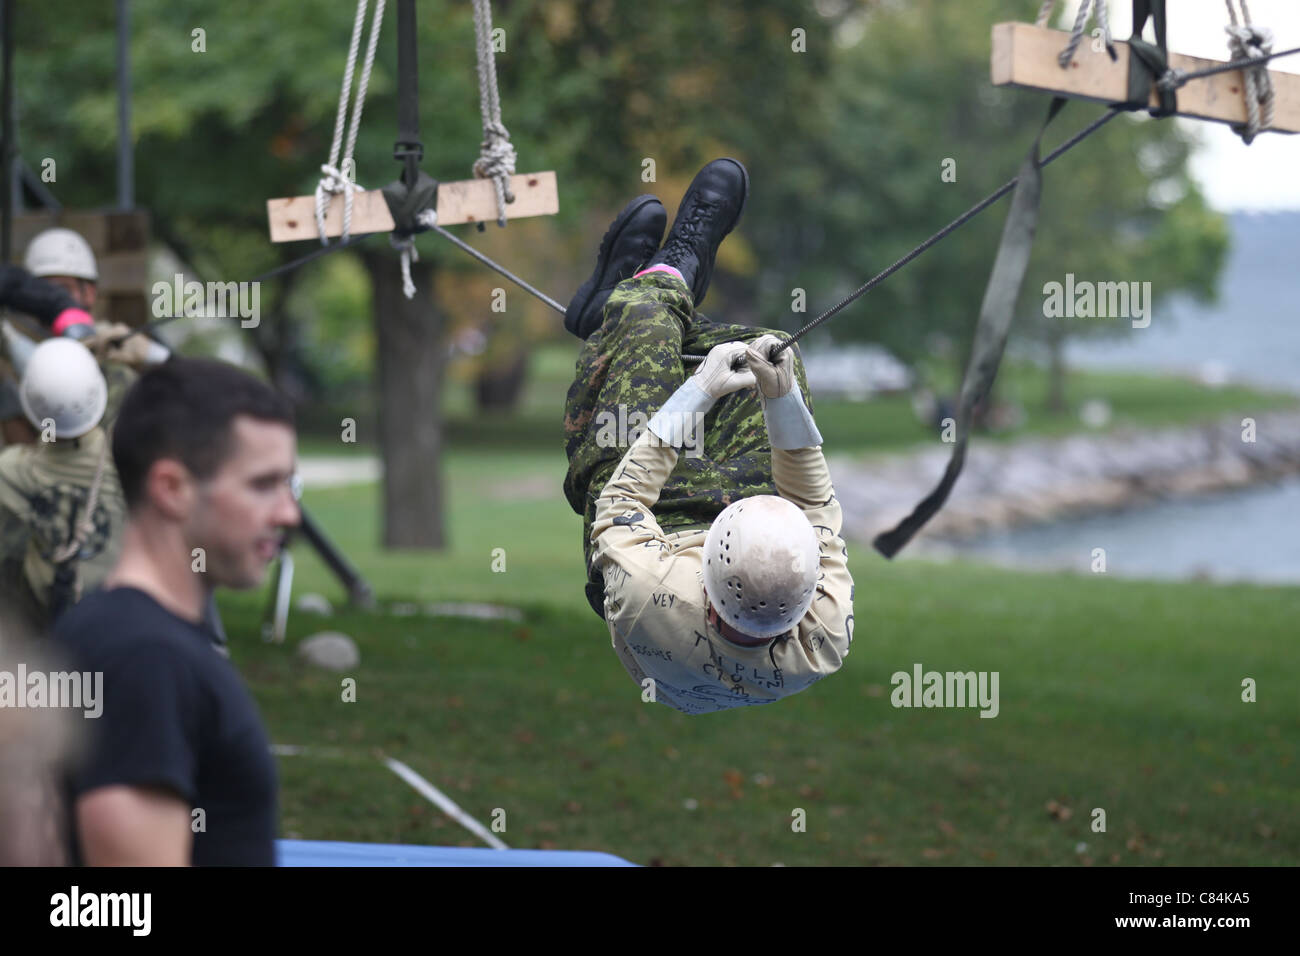 Man on manual zip line during a military obstacle course Stock Photo